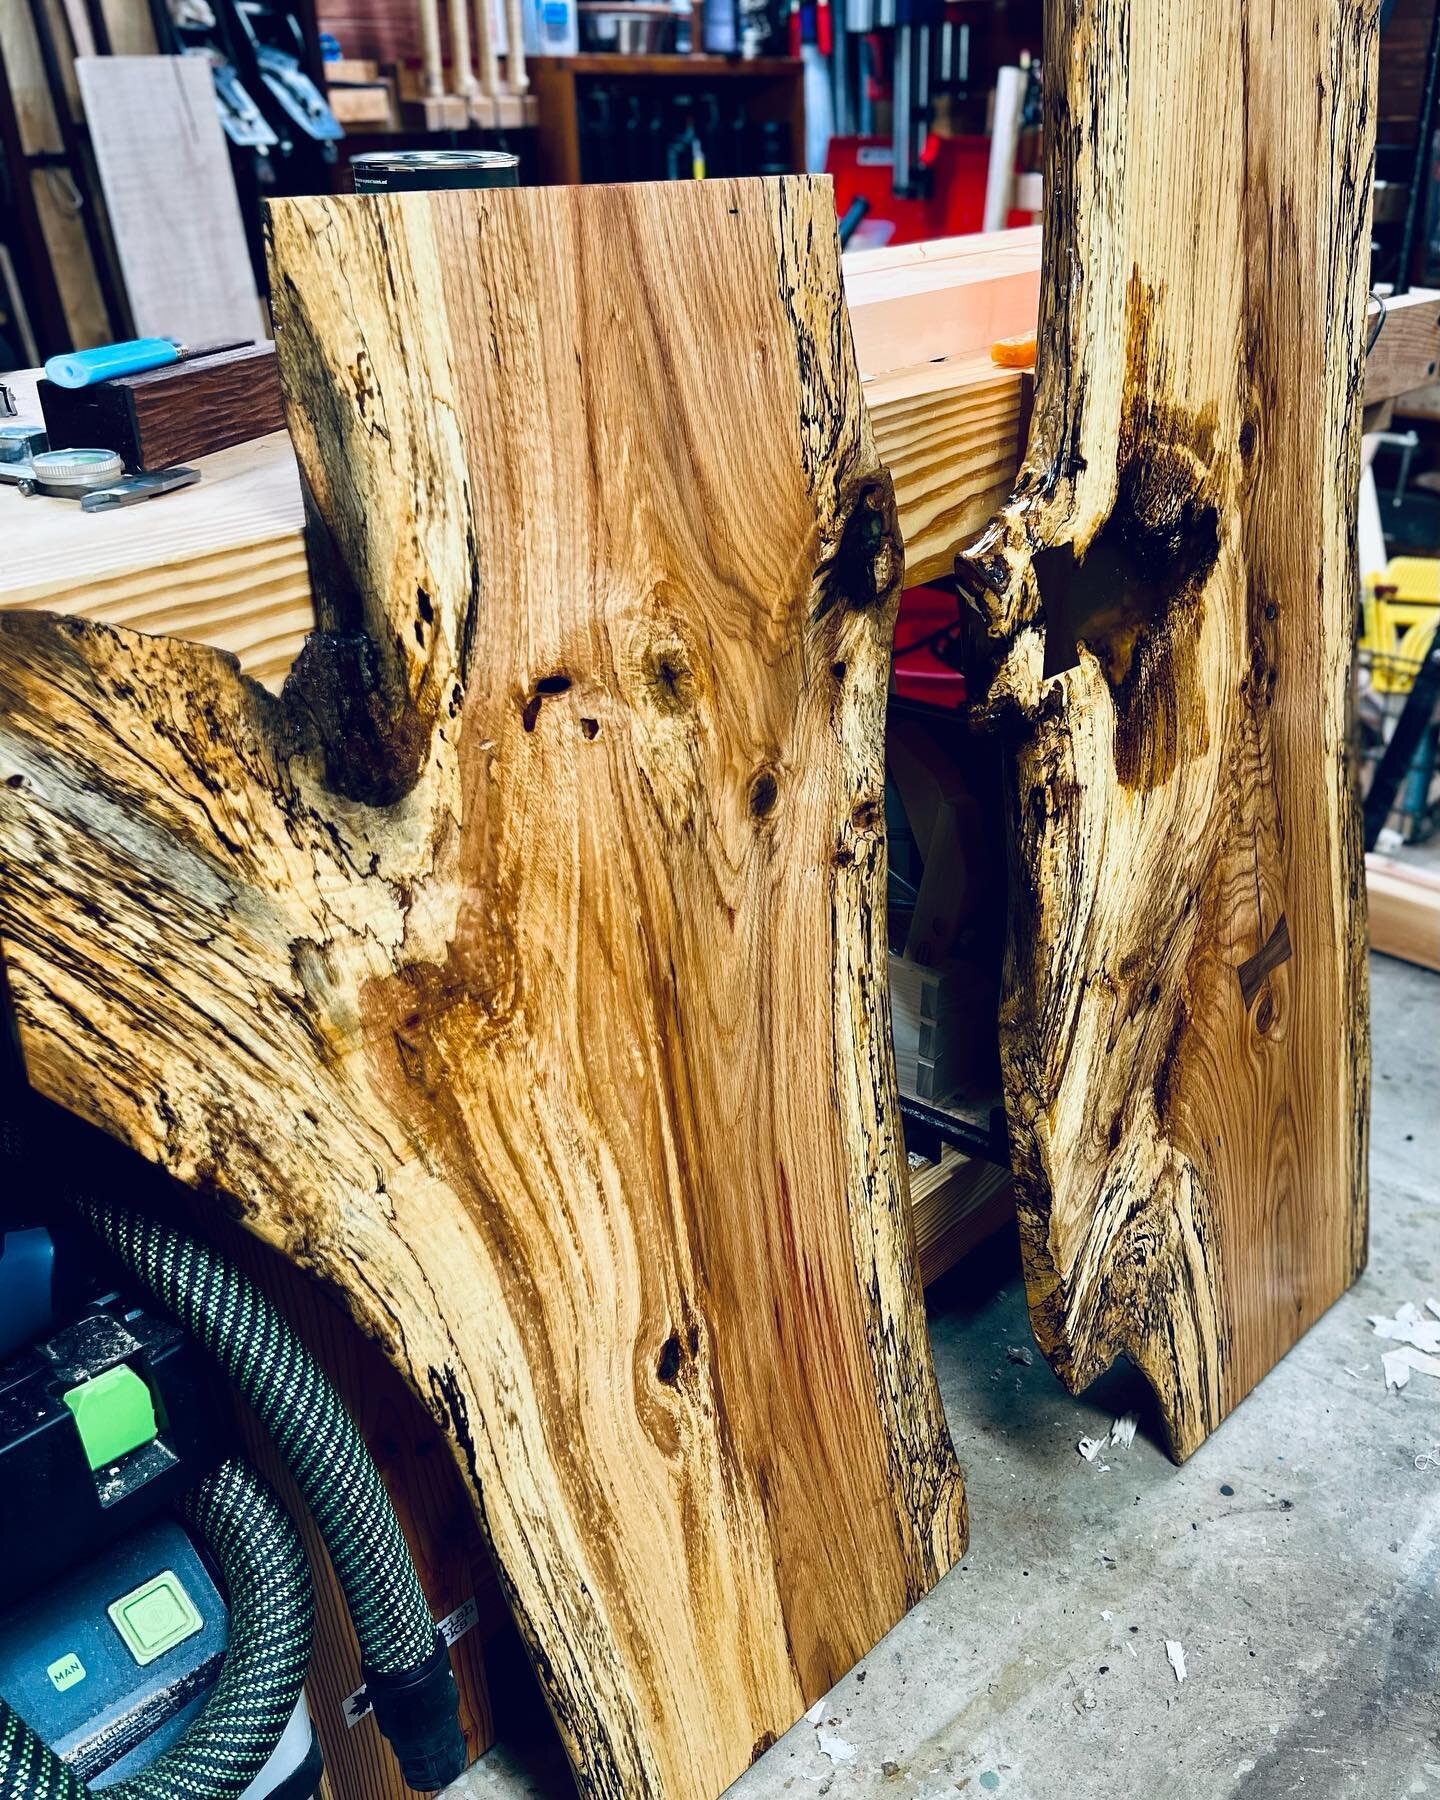 Seems like I have been fighting these two little slabs for a month now trying to get them to agree on what flat is, glad to get them out of the shop soon and out of my way so I can get to work on the writing desk.